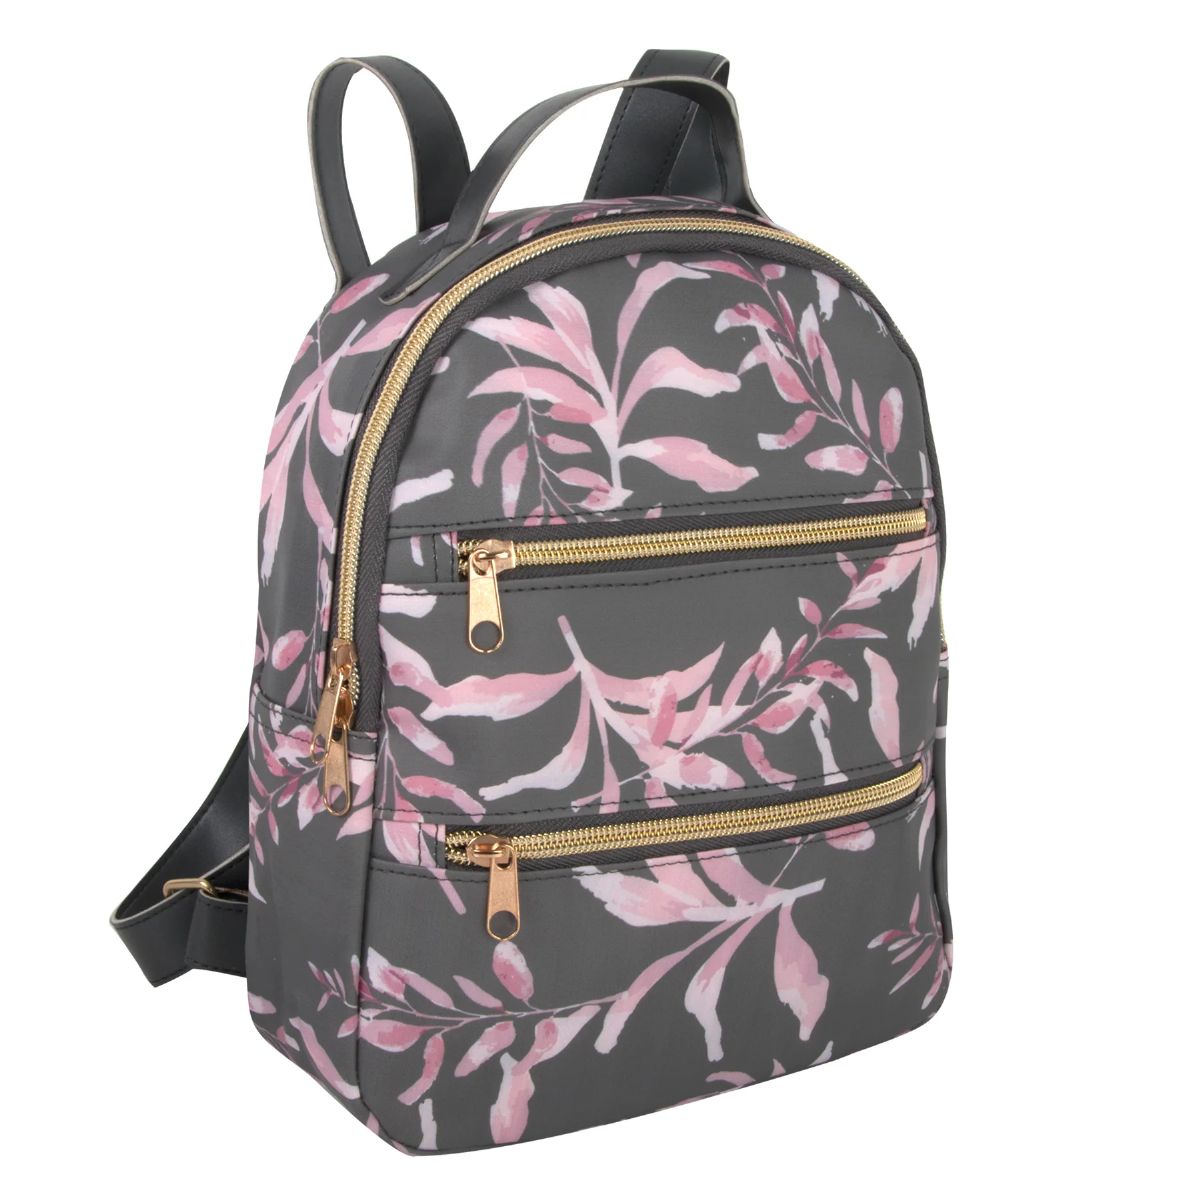 24 Pieces of Mini 10 Inch Floral Vinyl Backpack With Double Front Zippered